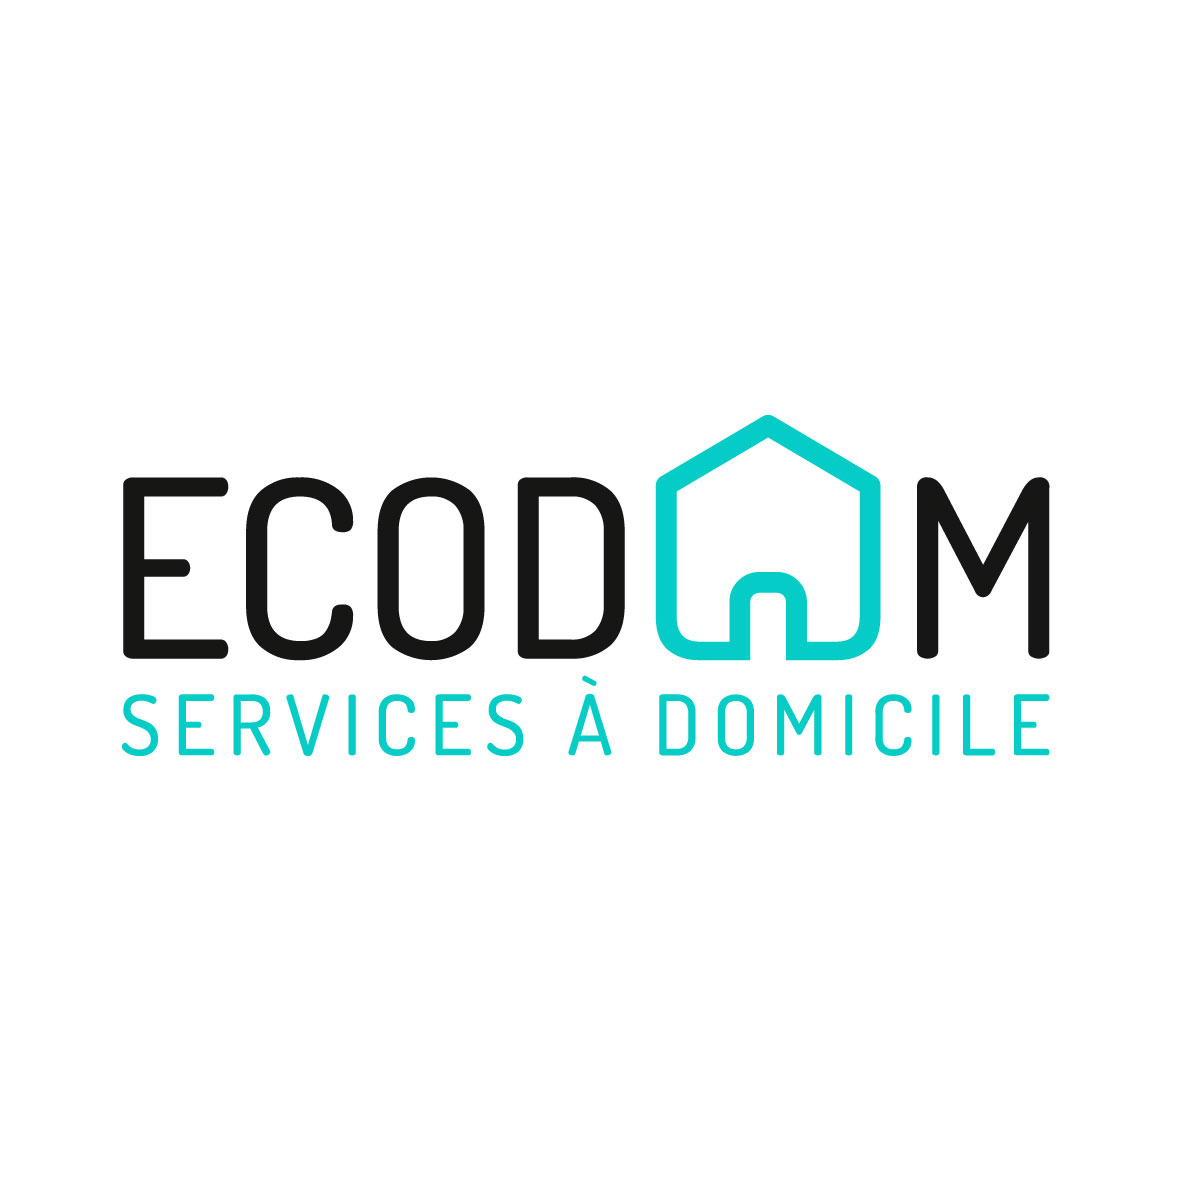 (c) Ecodomservices.ch